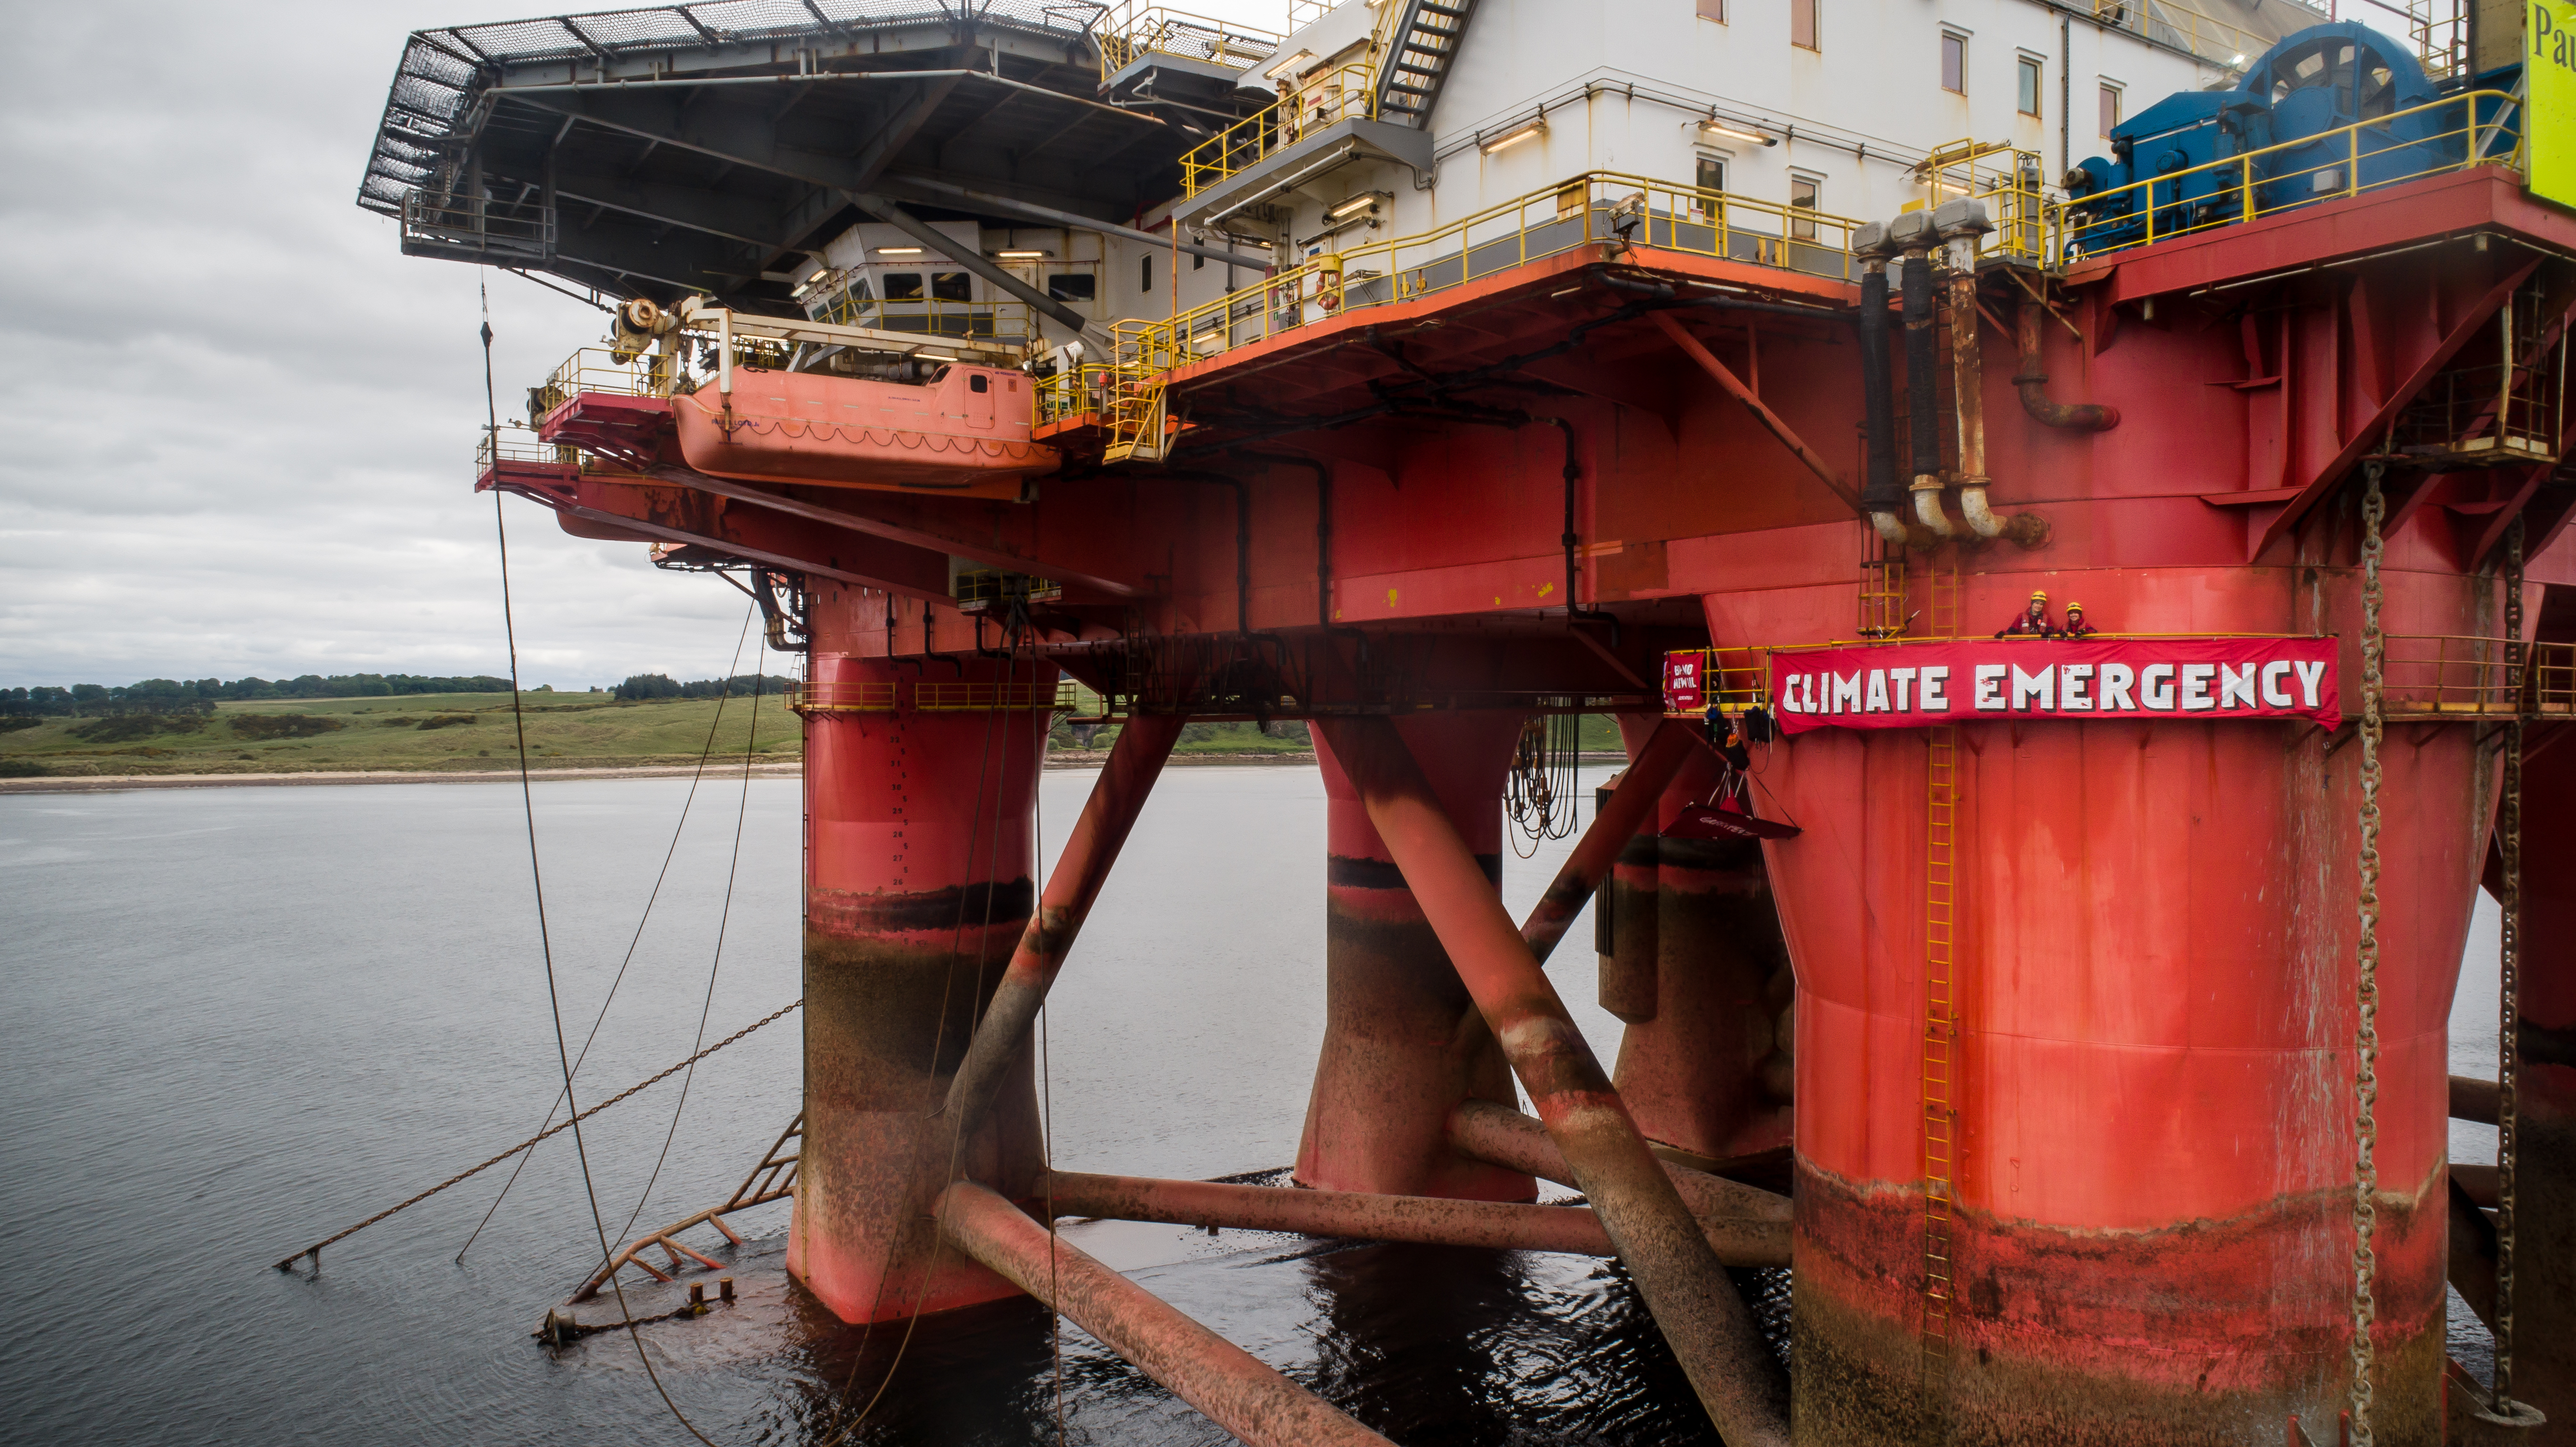 Image for While we’re sat up here on a giant oil rig, let’s clear up a few things